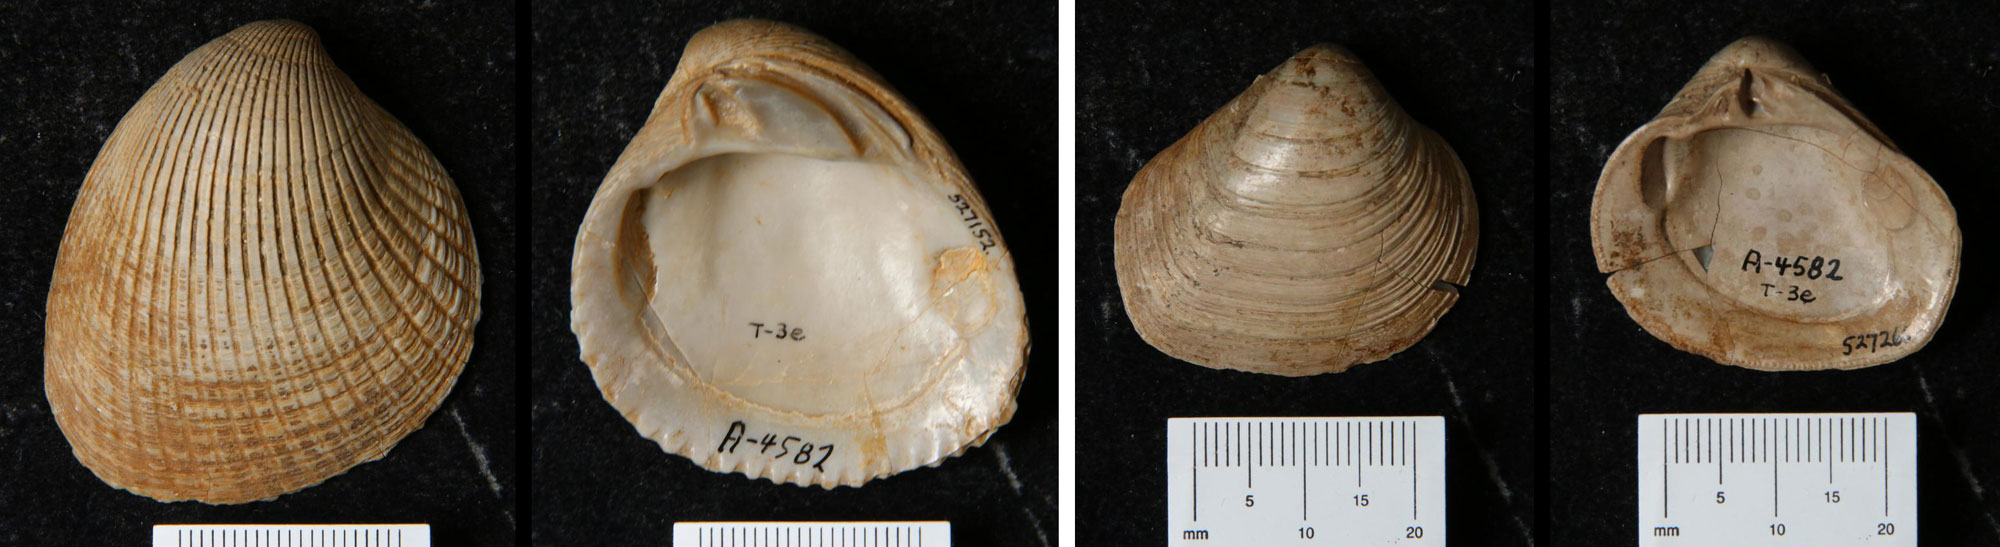 Figure showing photos of two species of bivalves from the Eocene Cook Mountain Formation of Texas. In each image, the inner and outer surface of a shell is shown.